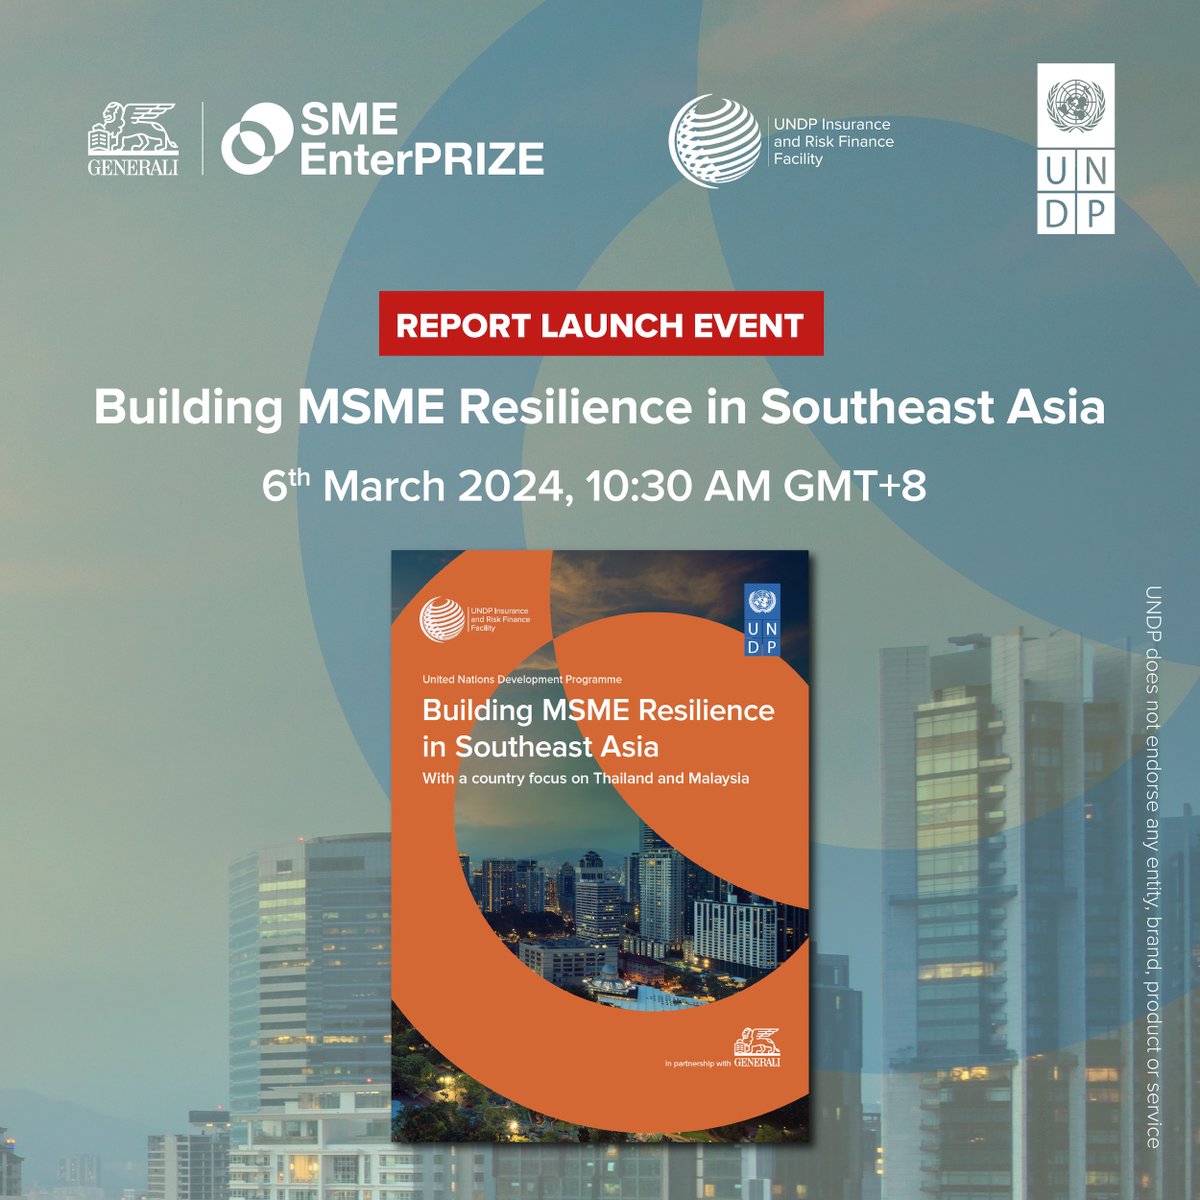 1️⃣ week till the 'Building MSME Resilience in Southeast Asia' report launches in Kuala Lumpur and online 

🔦Explore a new approach to identifying risks and increasing MSME resilience

➡️irff.undp.org/events/buildin…

#ProtectTheFuture #Insurance4SDGs #financialresilience #MYUNDP